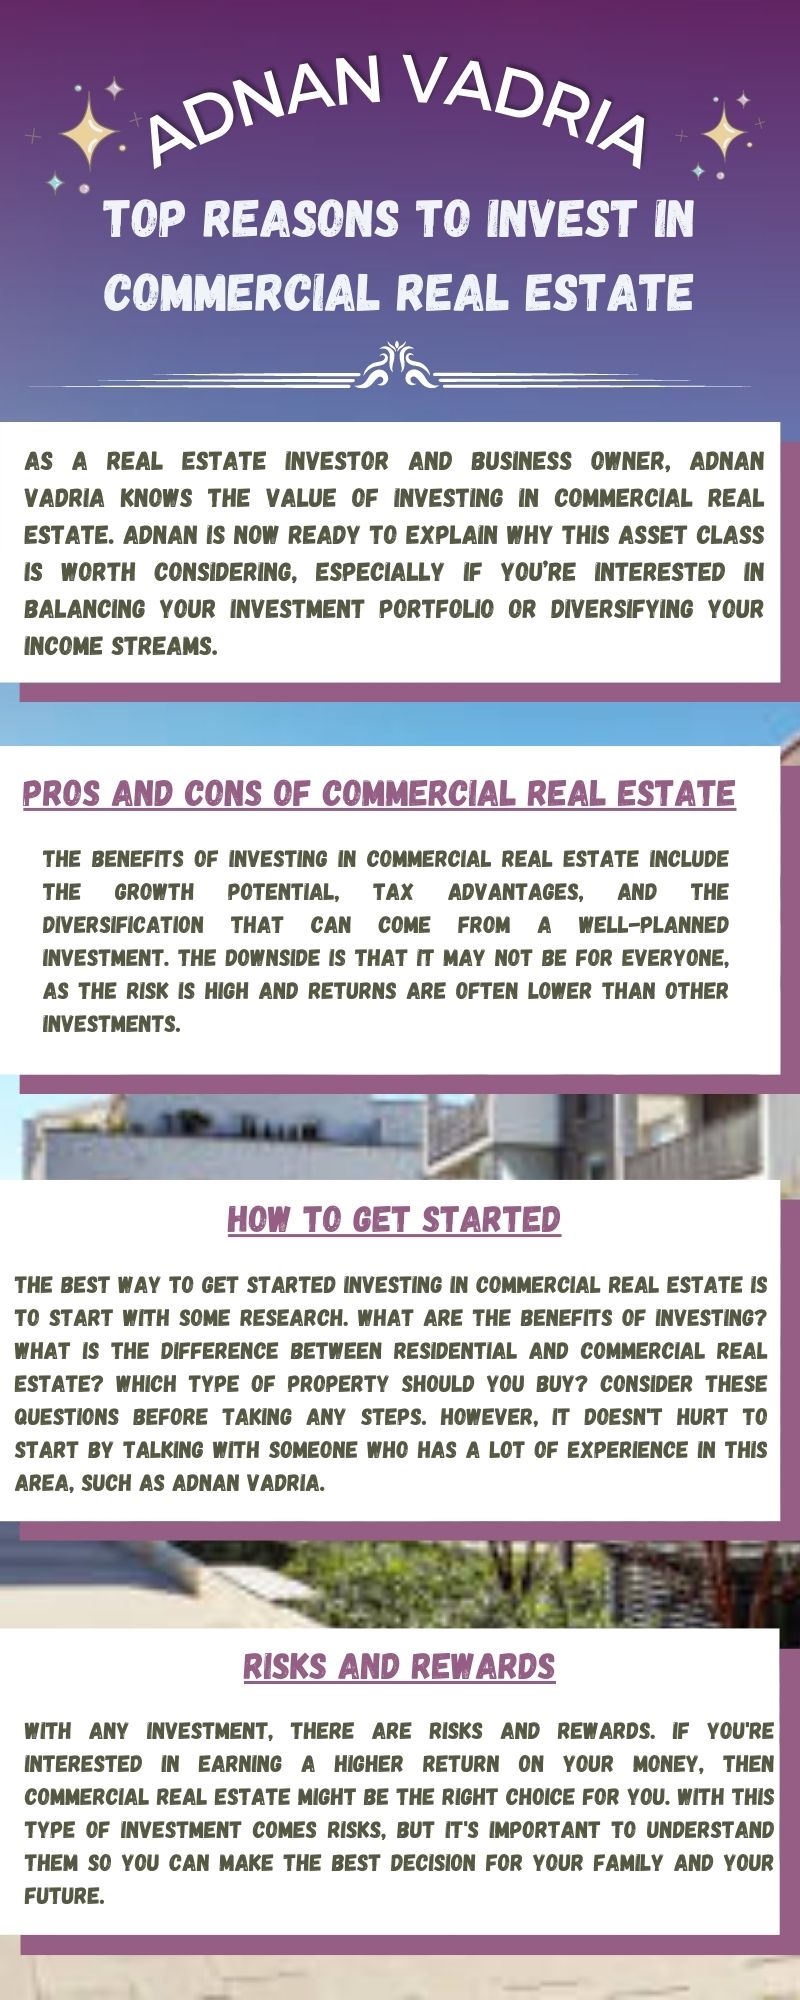 Adnan Vadria’s Top Reasons to Invest in Commercial Real Estate